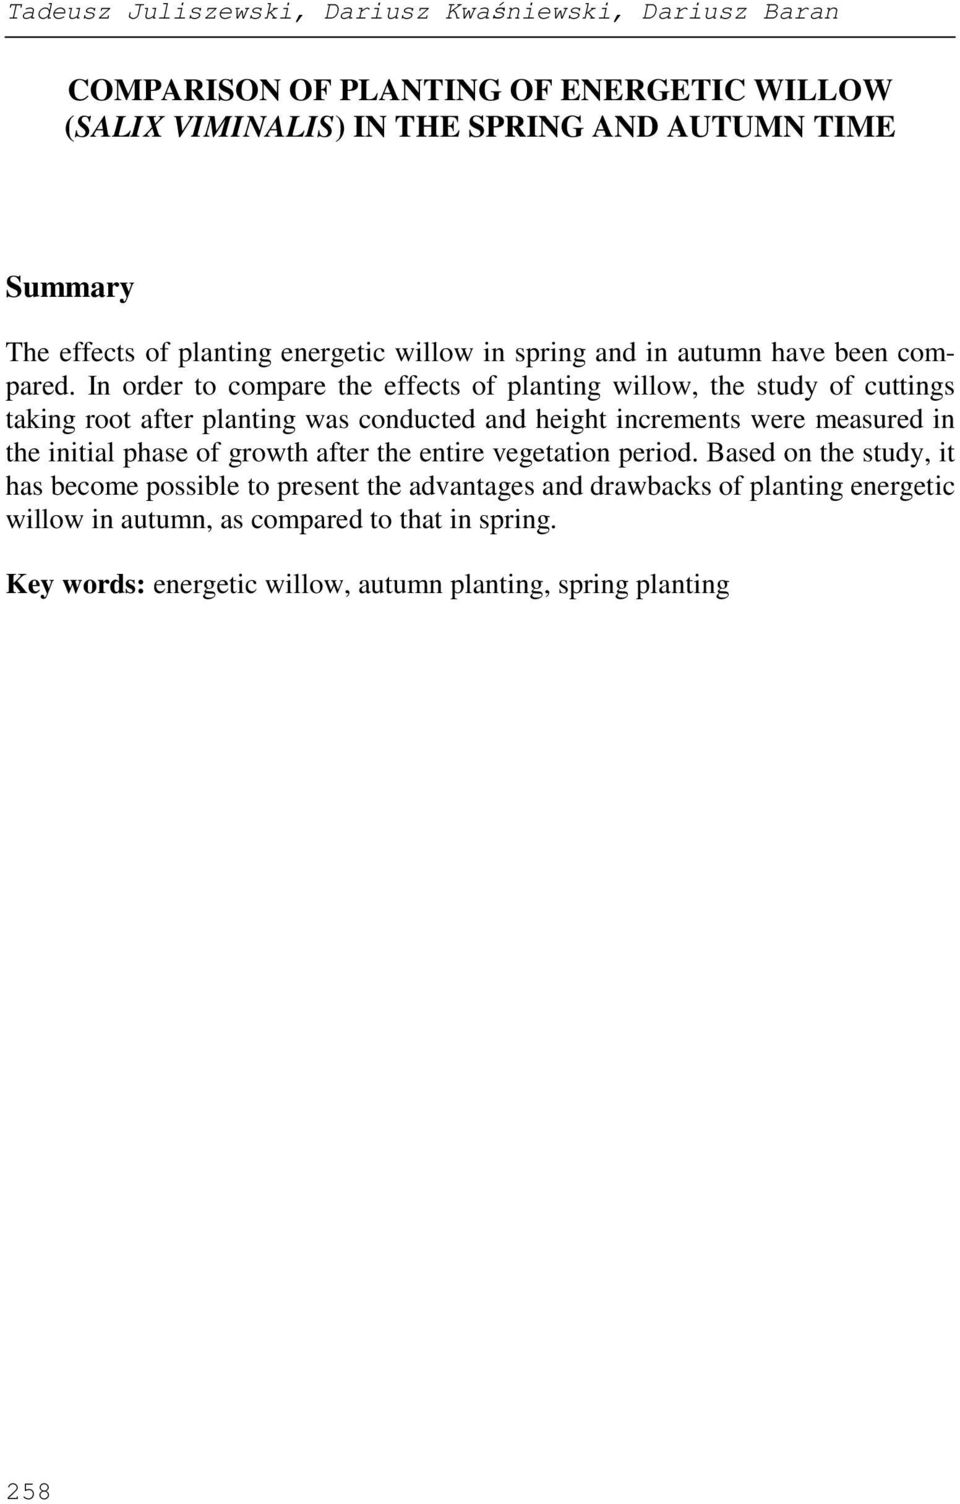 In order to compare the effects of planting willow, the study of cuttings taking root after planting was conducted and height increments were measured in the initial